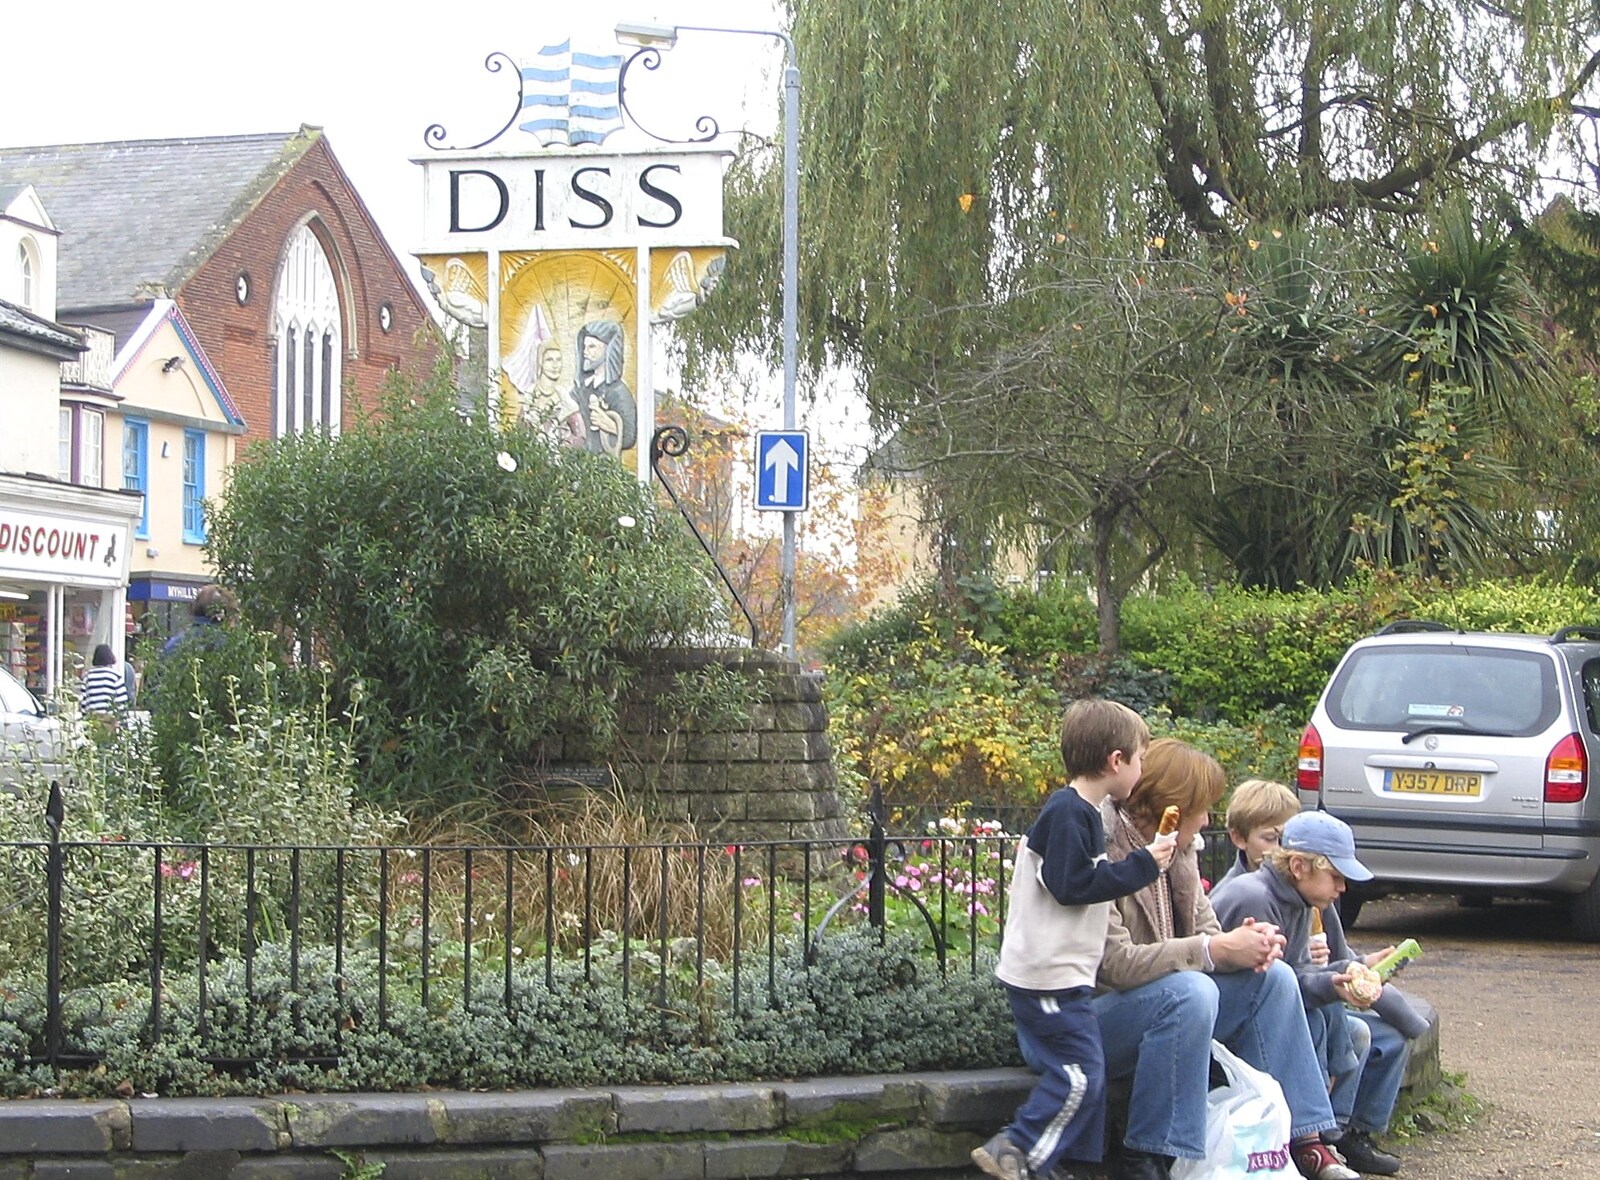 A family eats snacks by the town sign from Feeding the Ducks: a Diss and Norwich Miscellany - 7th November 2004